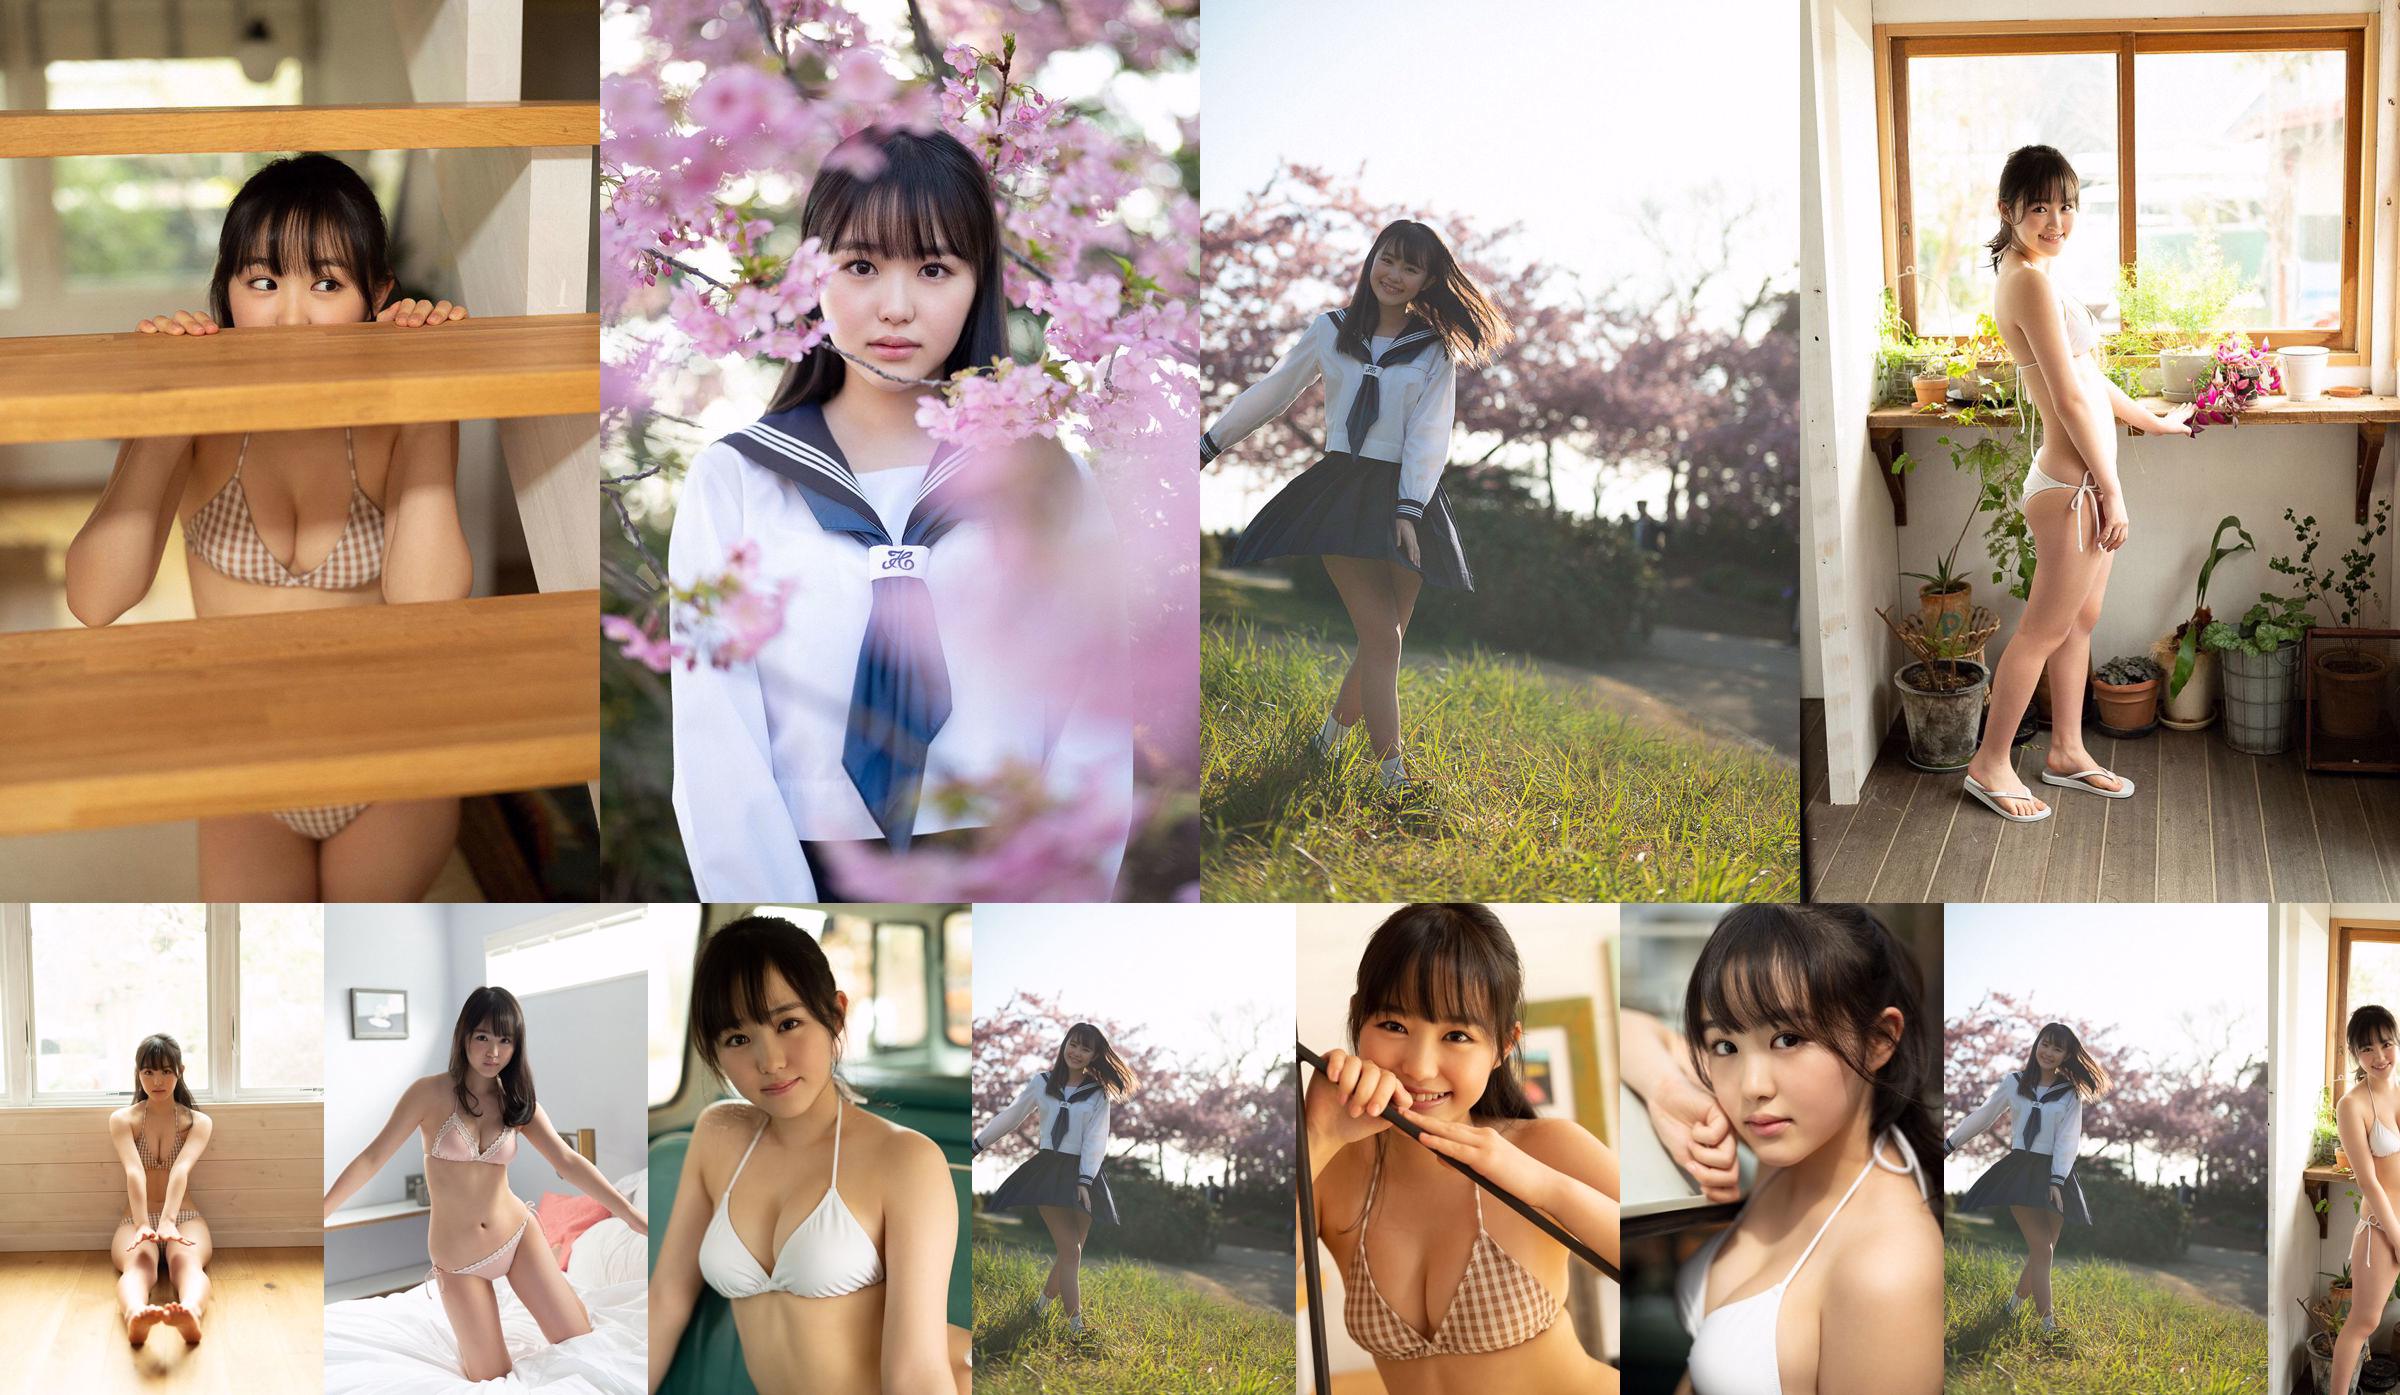 Koharu Ito "Come in Spring." [WPB-net] EXtra810 No.f68253 Page 2